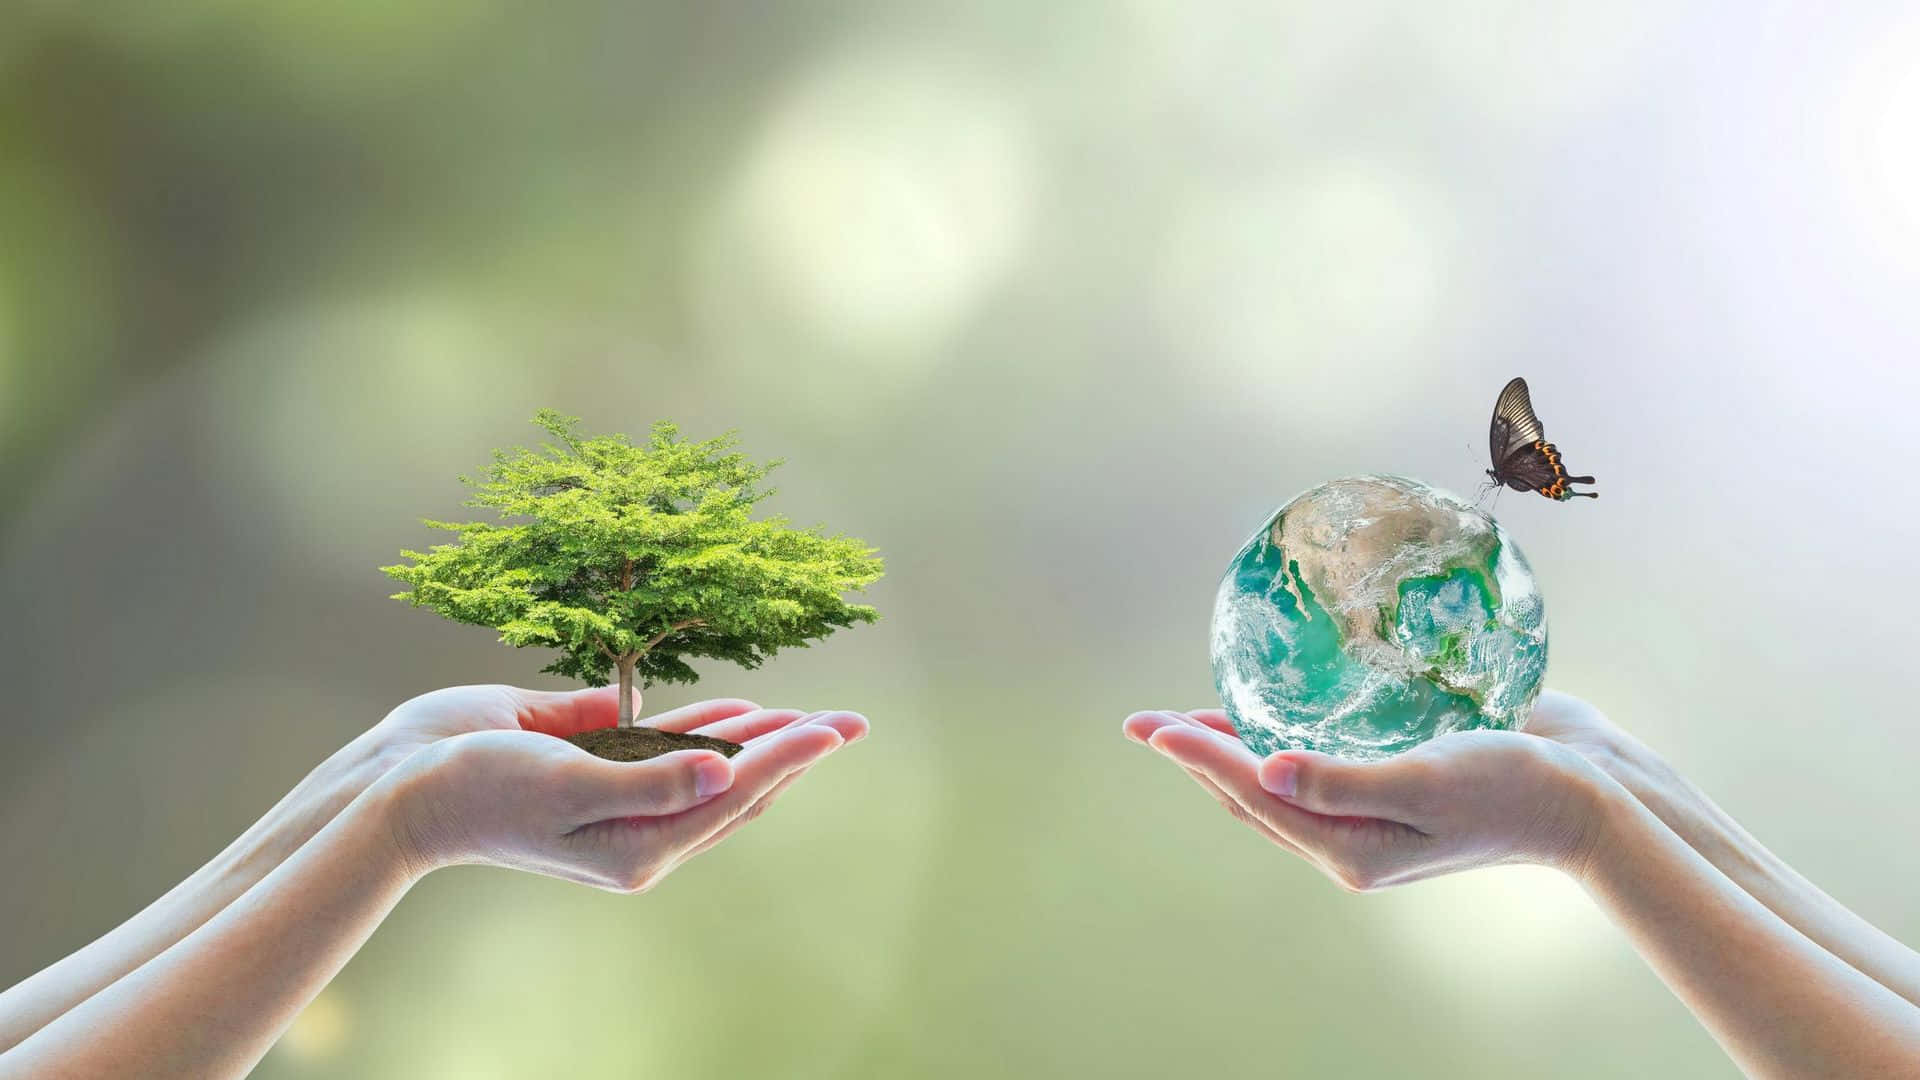 Sustainability Hands Up Wallpaper